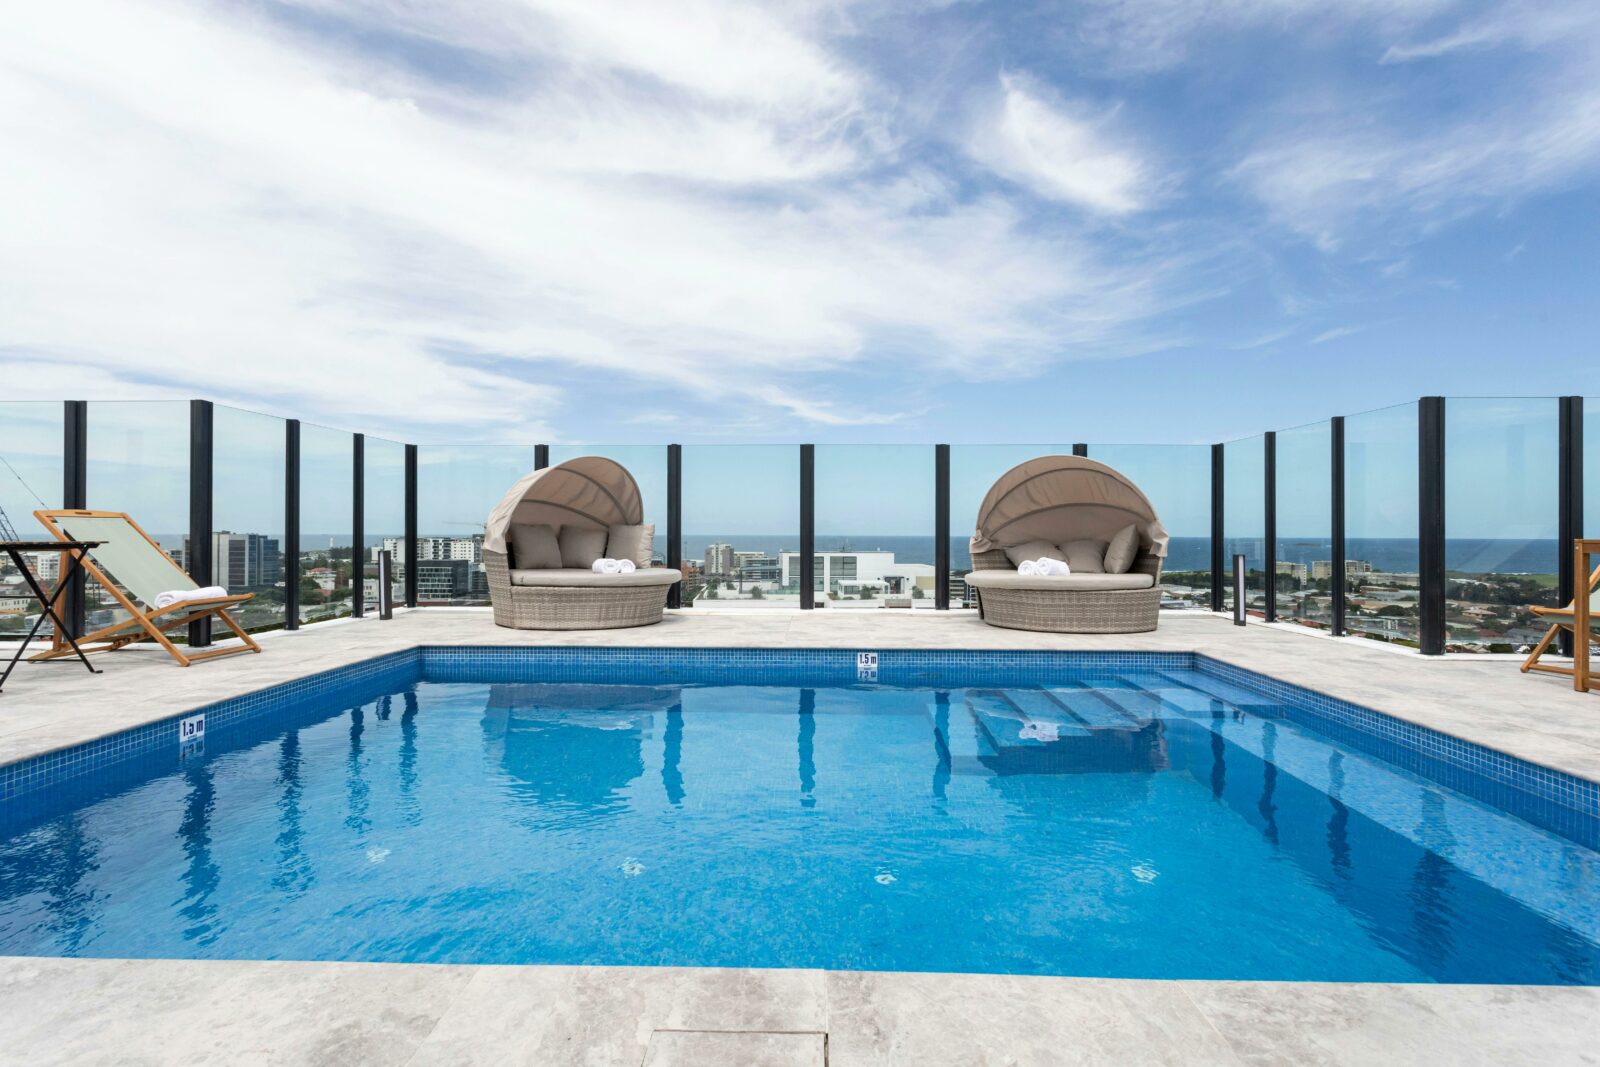 Views form the stunning rooftop pool